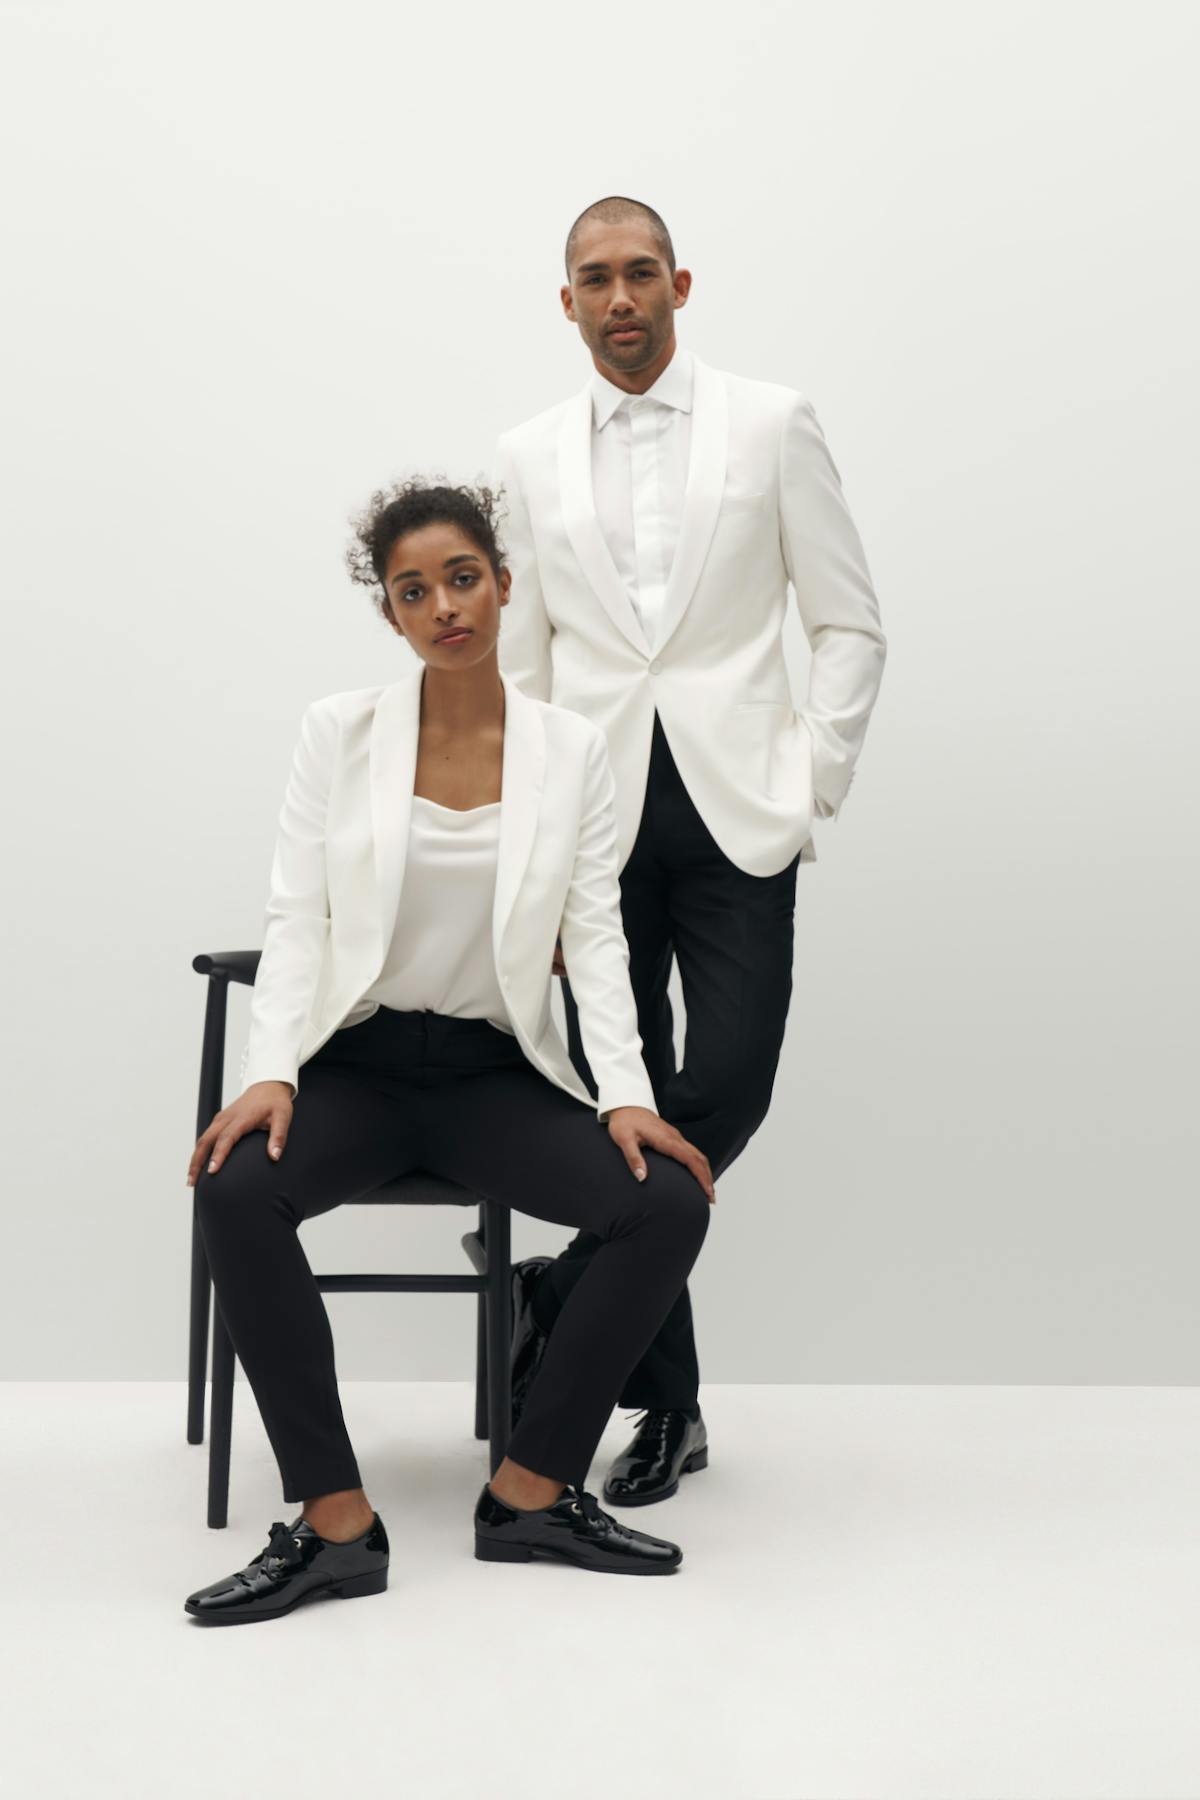 Man and woman posing in chair wearing white tuxedo jackets for a holiday gala.